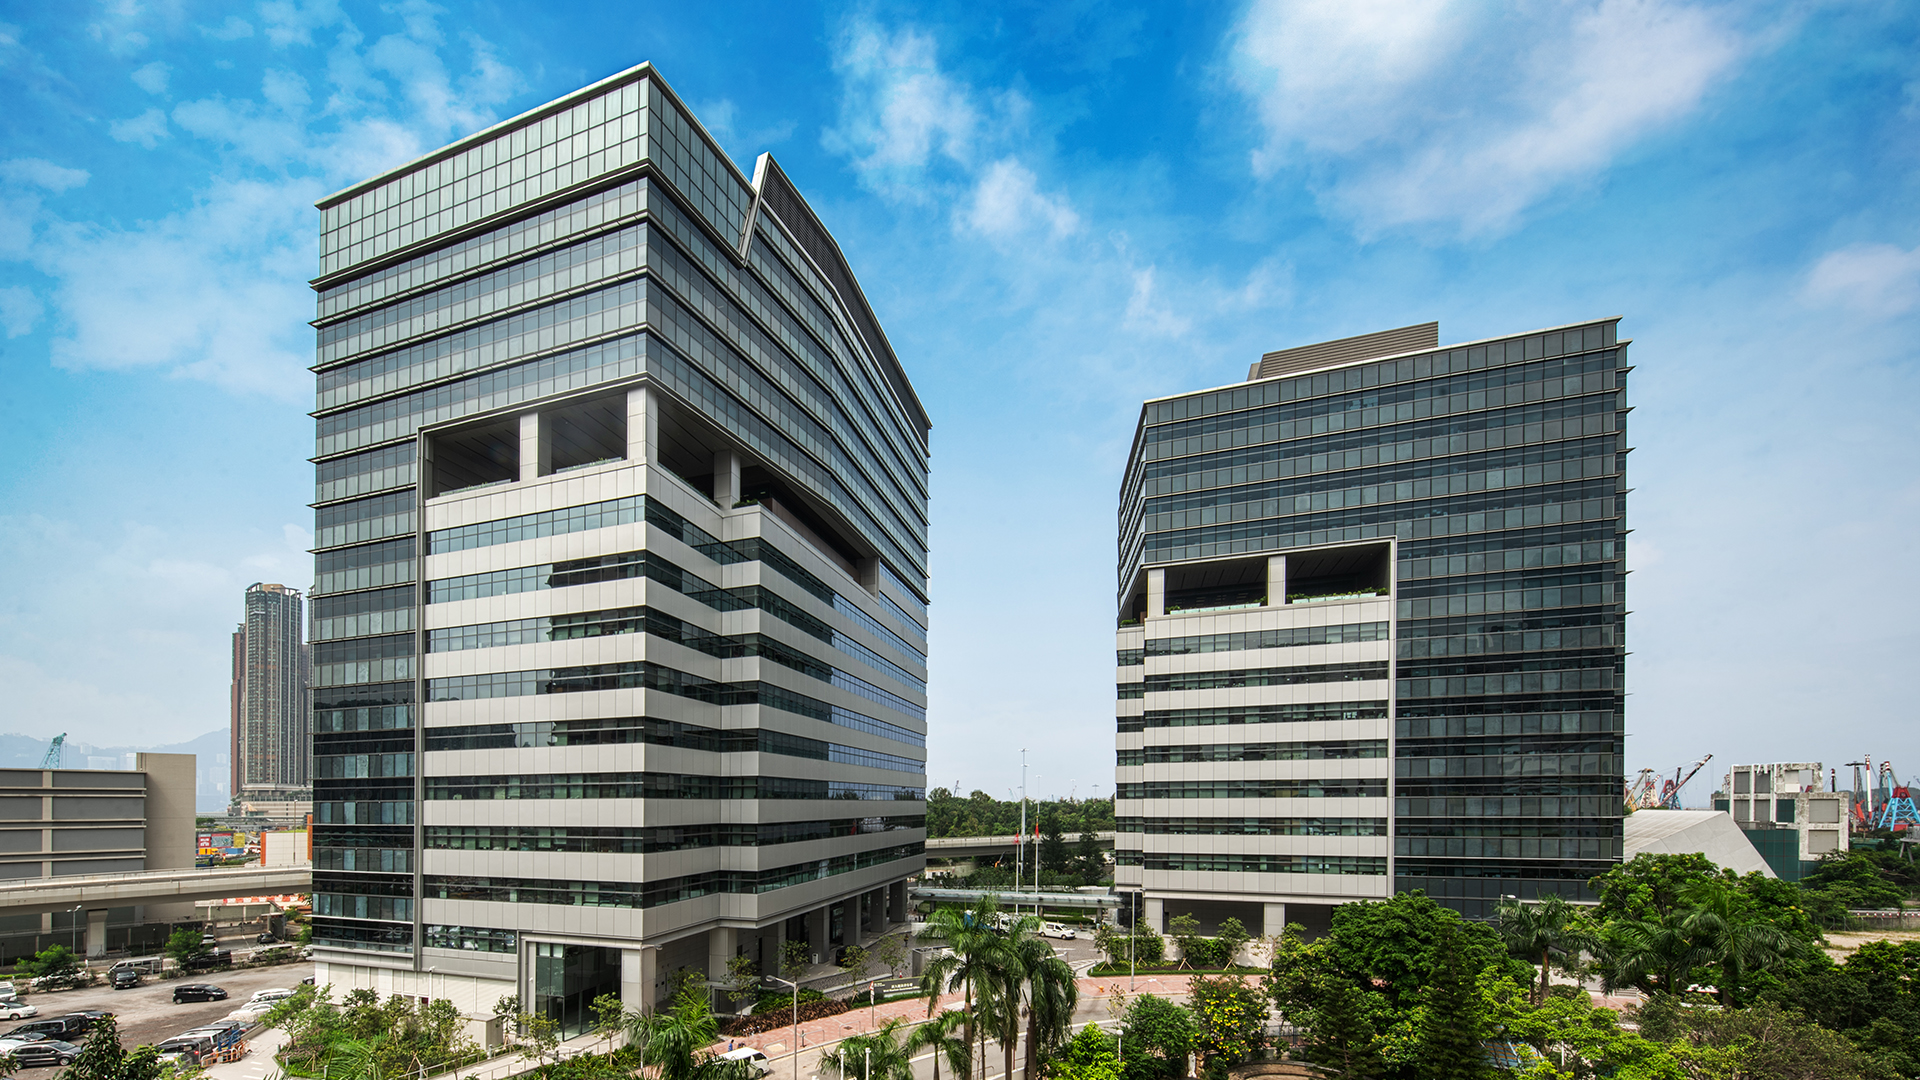 WEST KOWLOON GOVERNMENT OFFICES